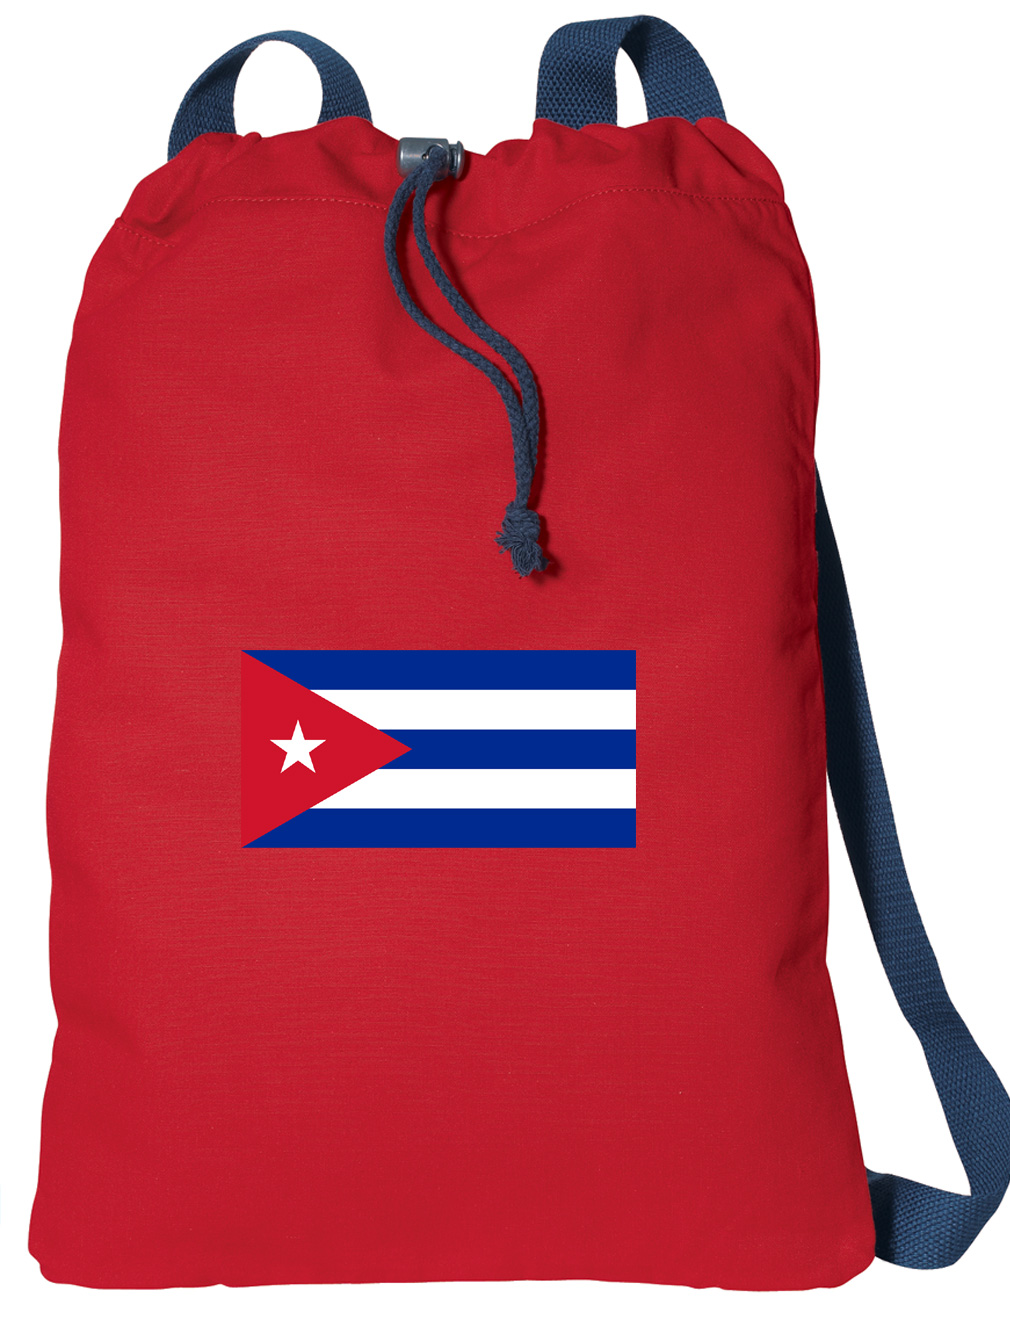 Canvas Cuba Drawstring Bag DELUXE Cuban Flag Backpack Cinch Pack for Him or Her - image 1 of 2